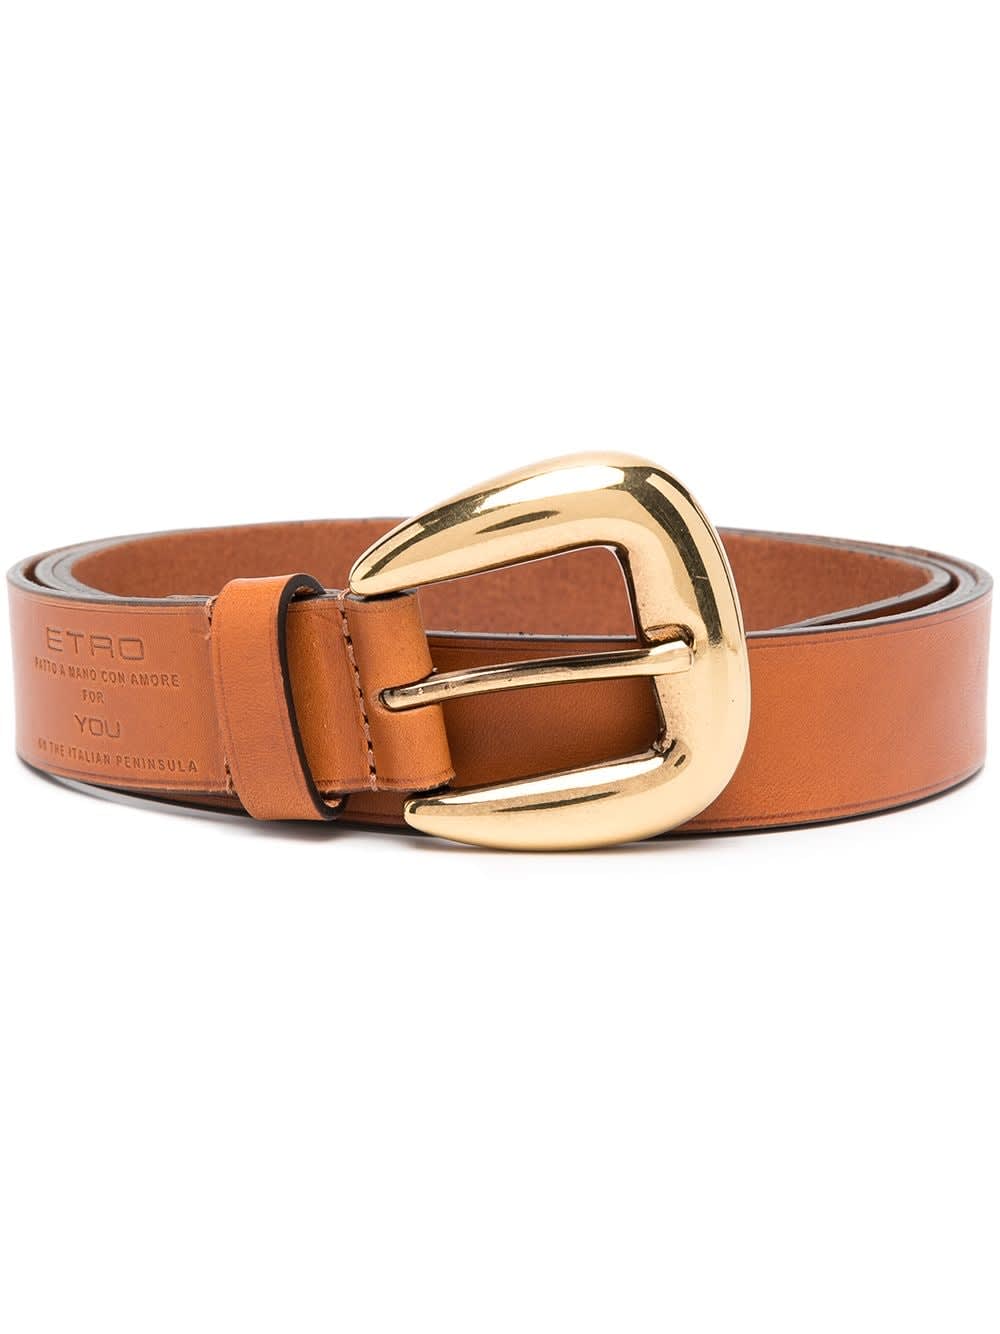 Etro Woman Brown And Gold Belt In Leather